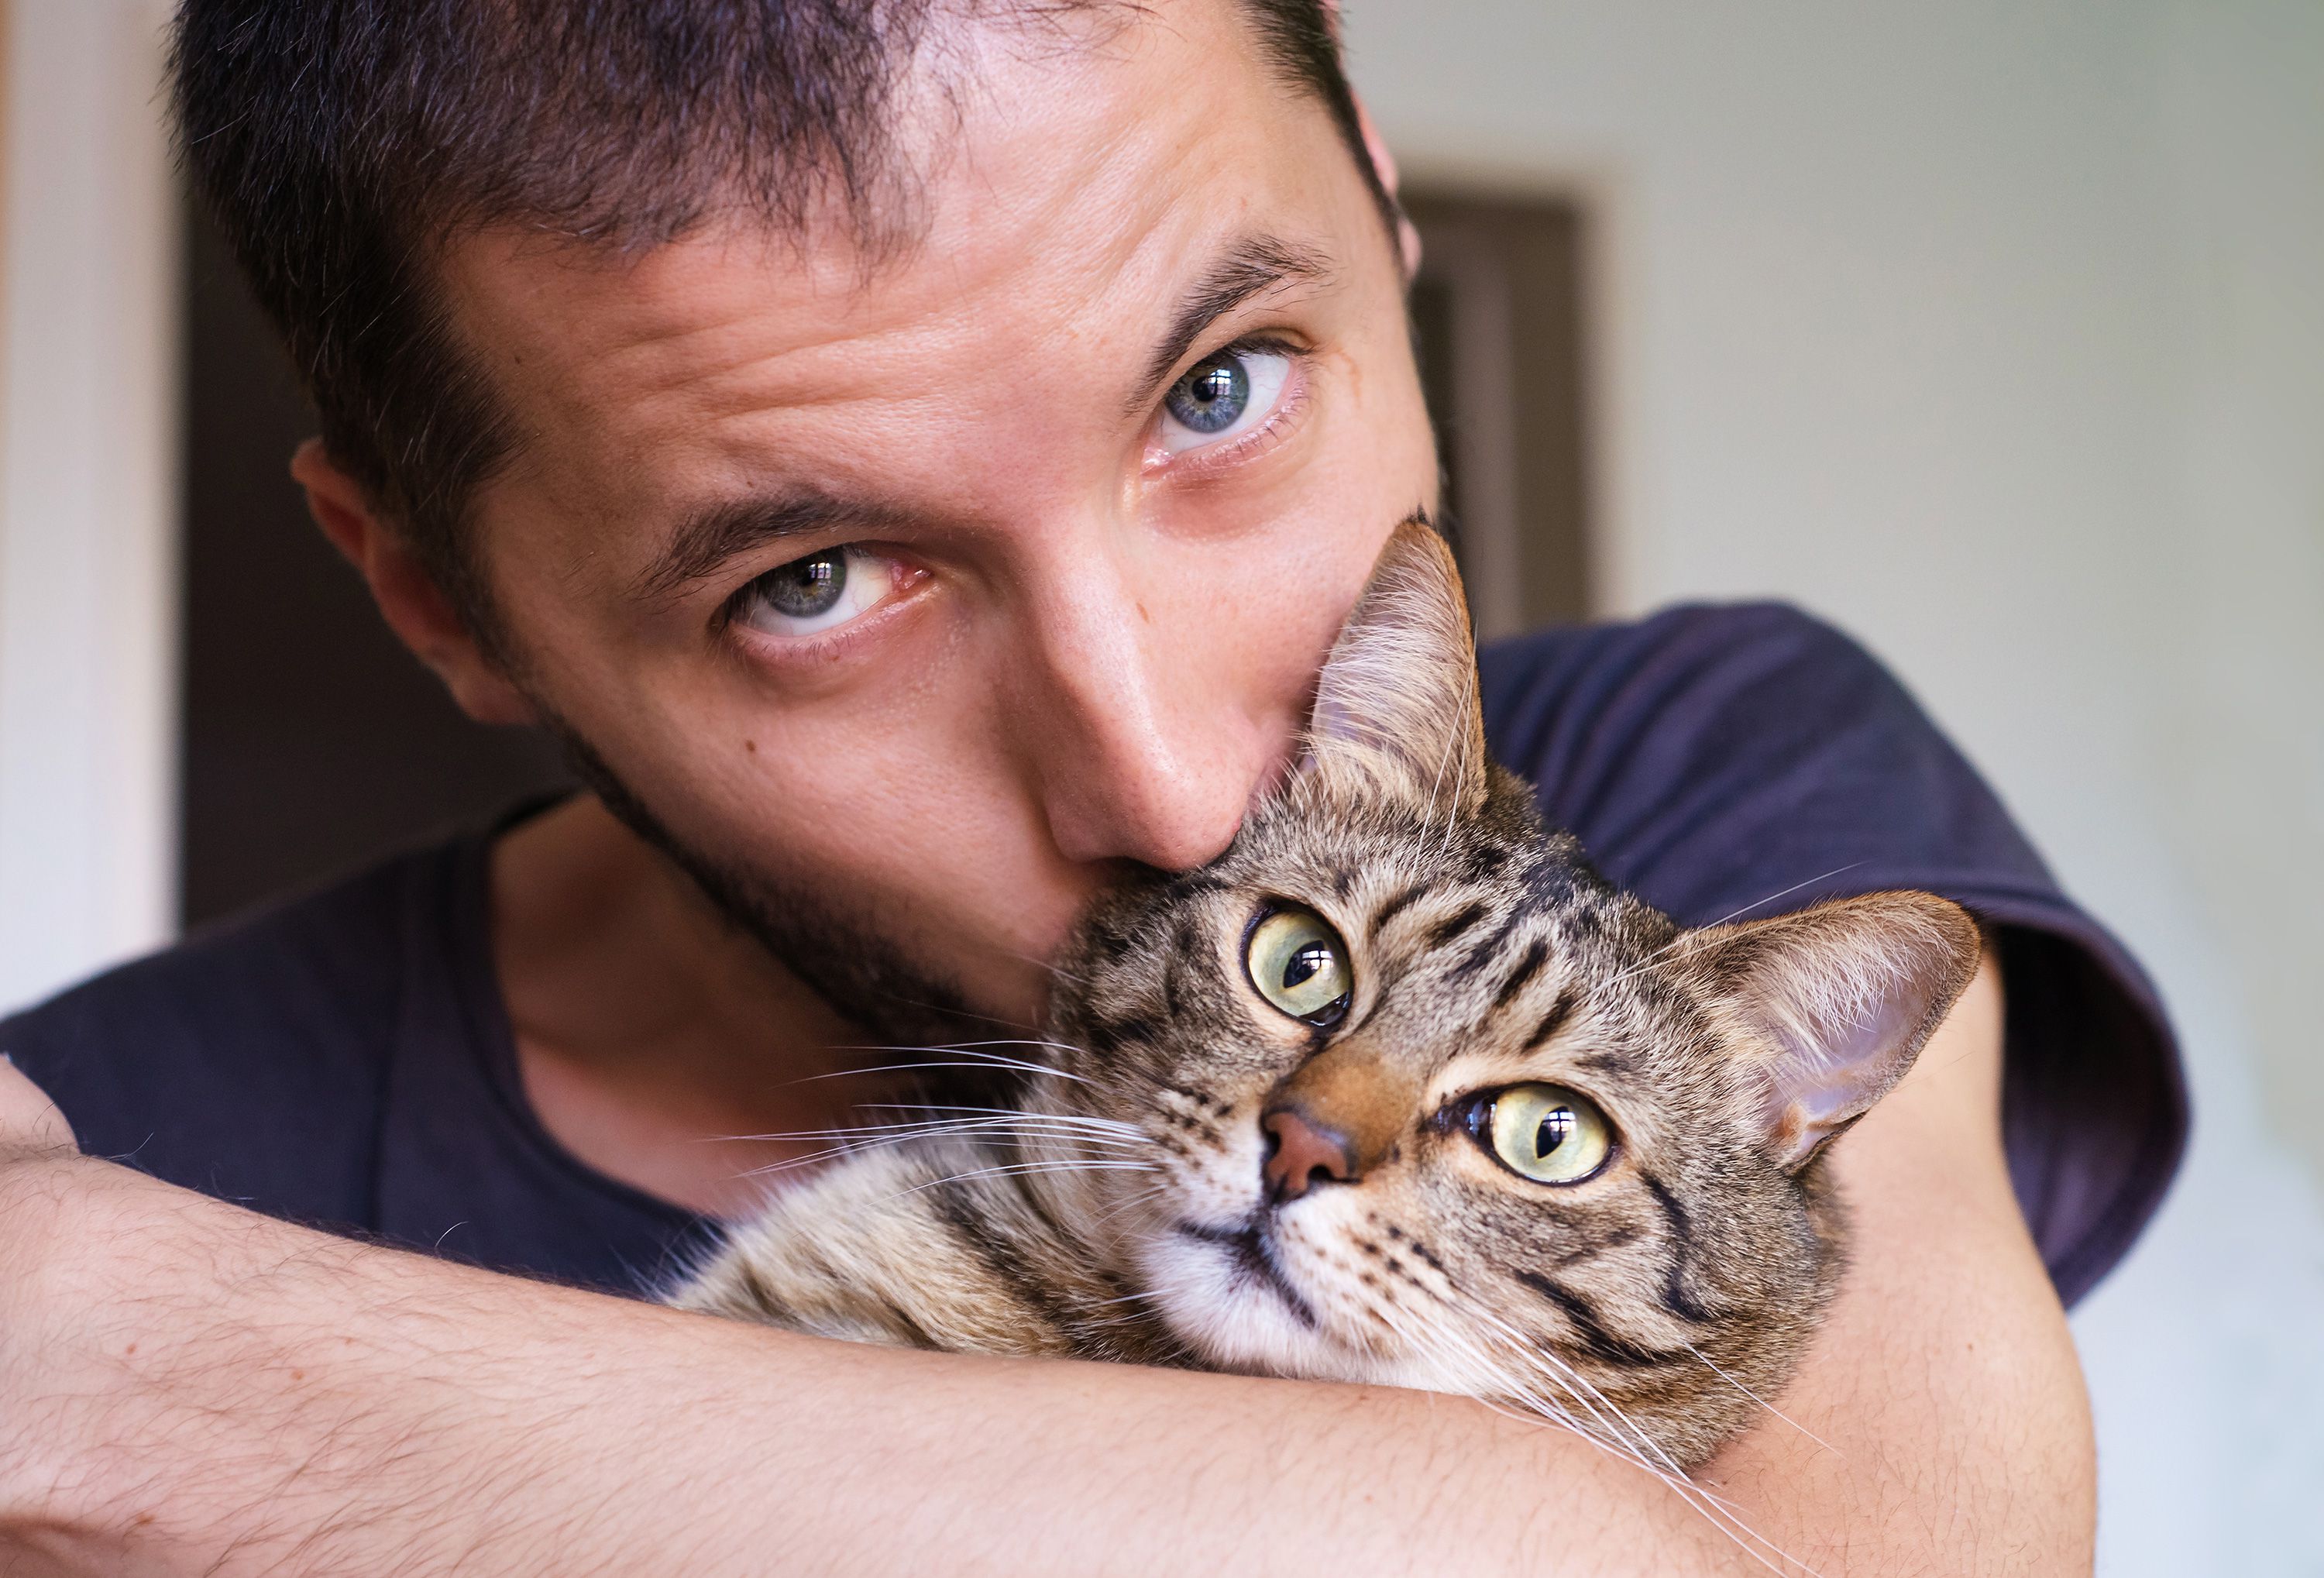 Over two thirds of cat owners are now men, research reveals